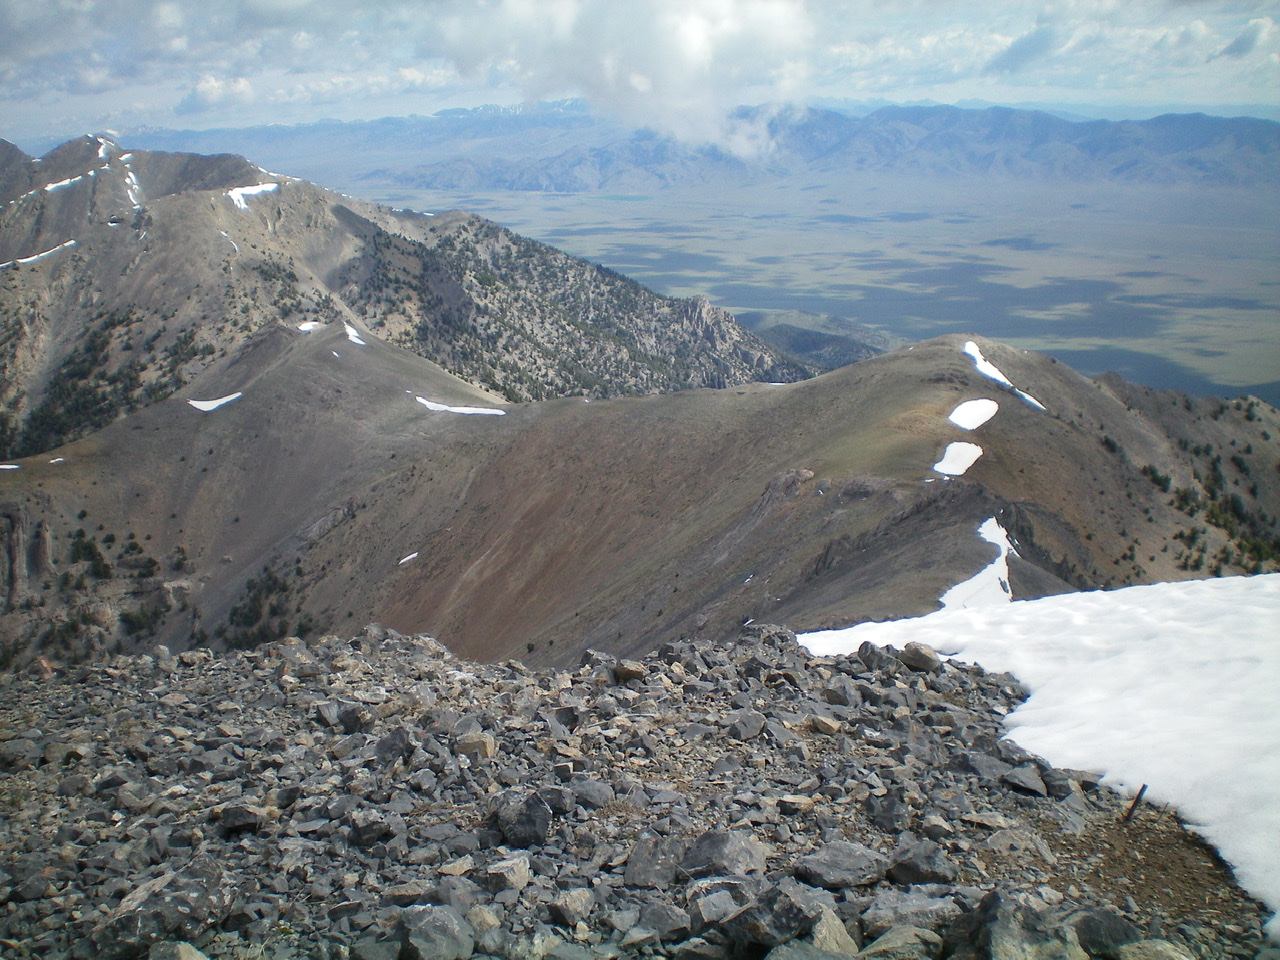 The upper section of the North Ridge/West Gully descent route, as viewed from the summit. Point 10196 is right of center. The saddle at the head of the West Gully is down the ridge from Point 10196 and is left of center with a thin lateral strip of snow near its top. The West Gully descends down and left from this saddle. There is steep, loose terrain in this section of the gully. Livingston Douglas Photo